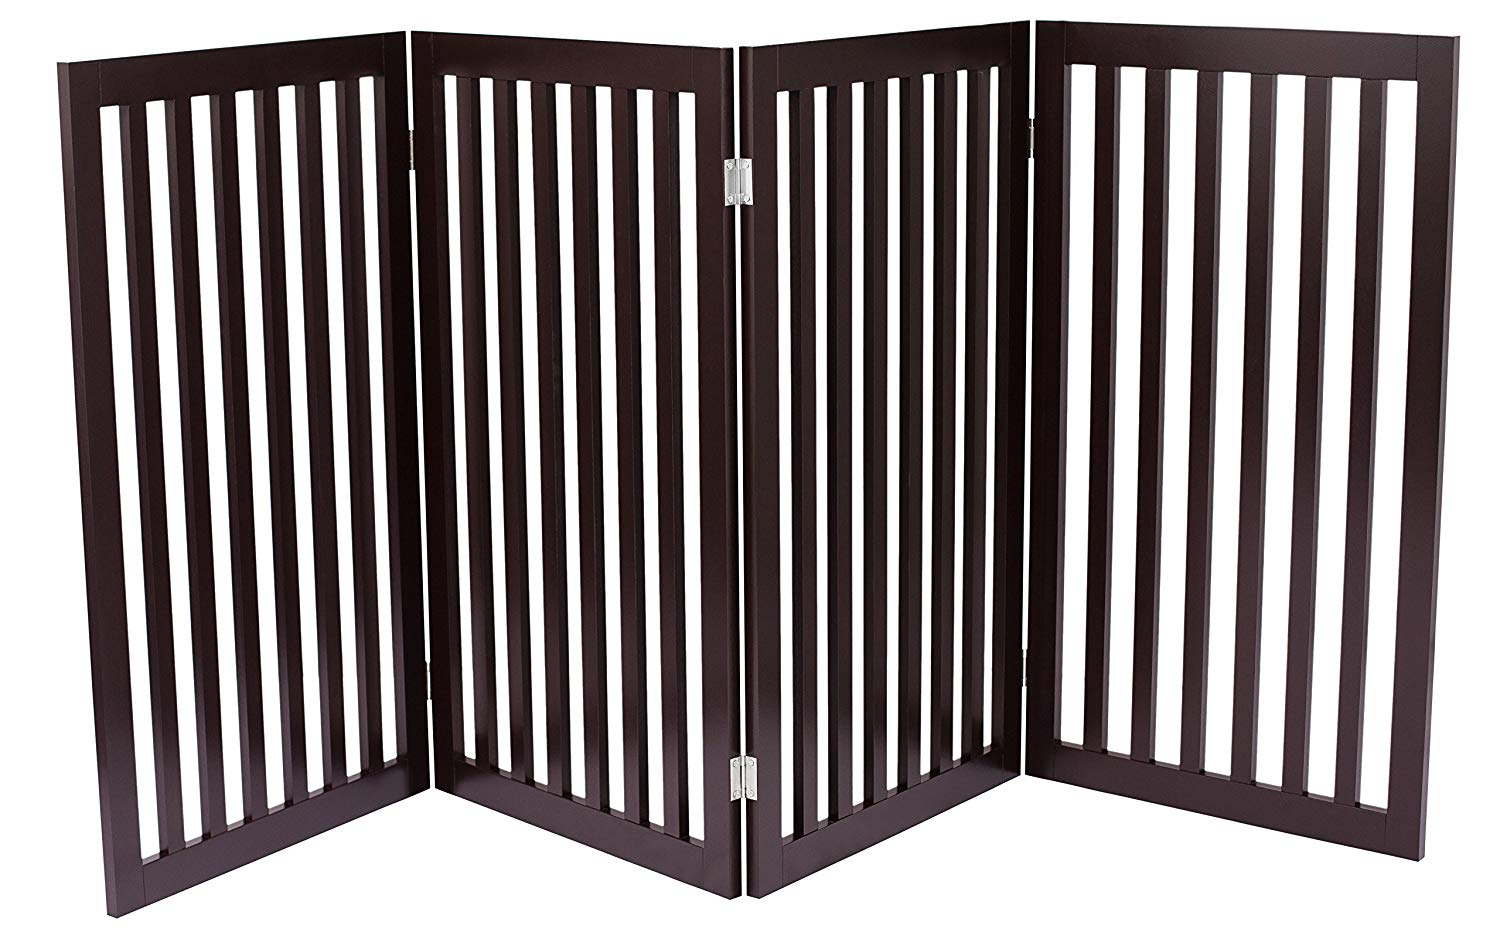 Internet's Best Traditional Pet Gate - 4 Panel - 36" Tall - Espresso - image 1 of 7